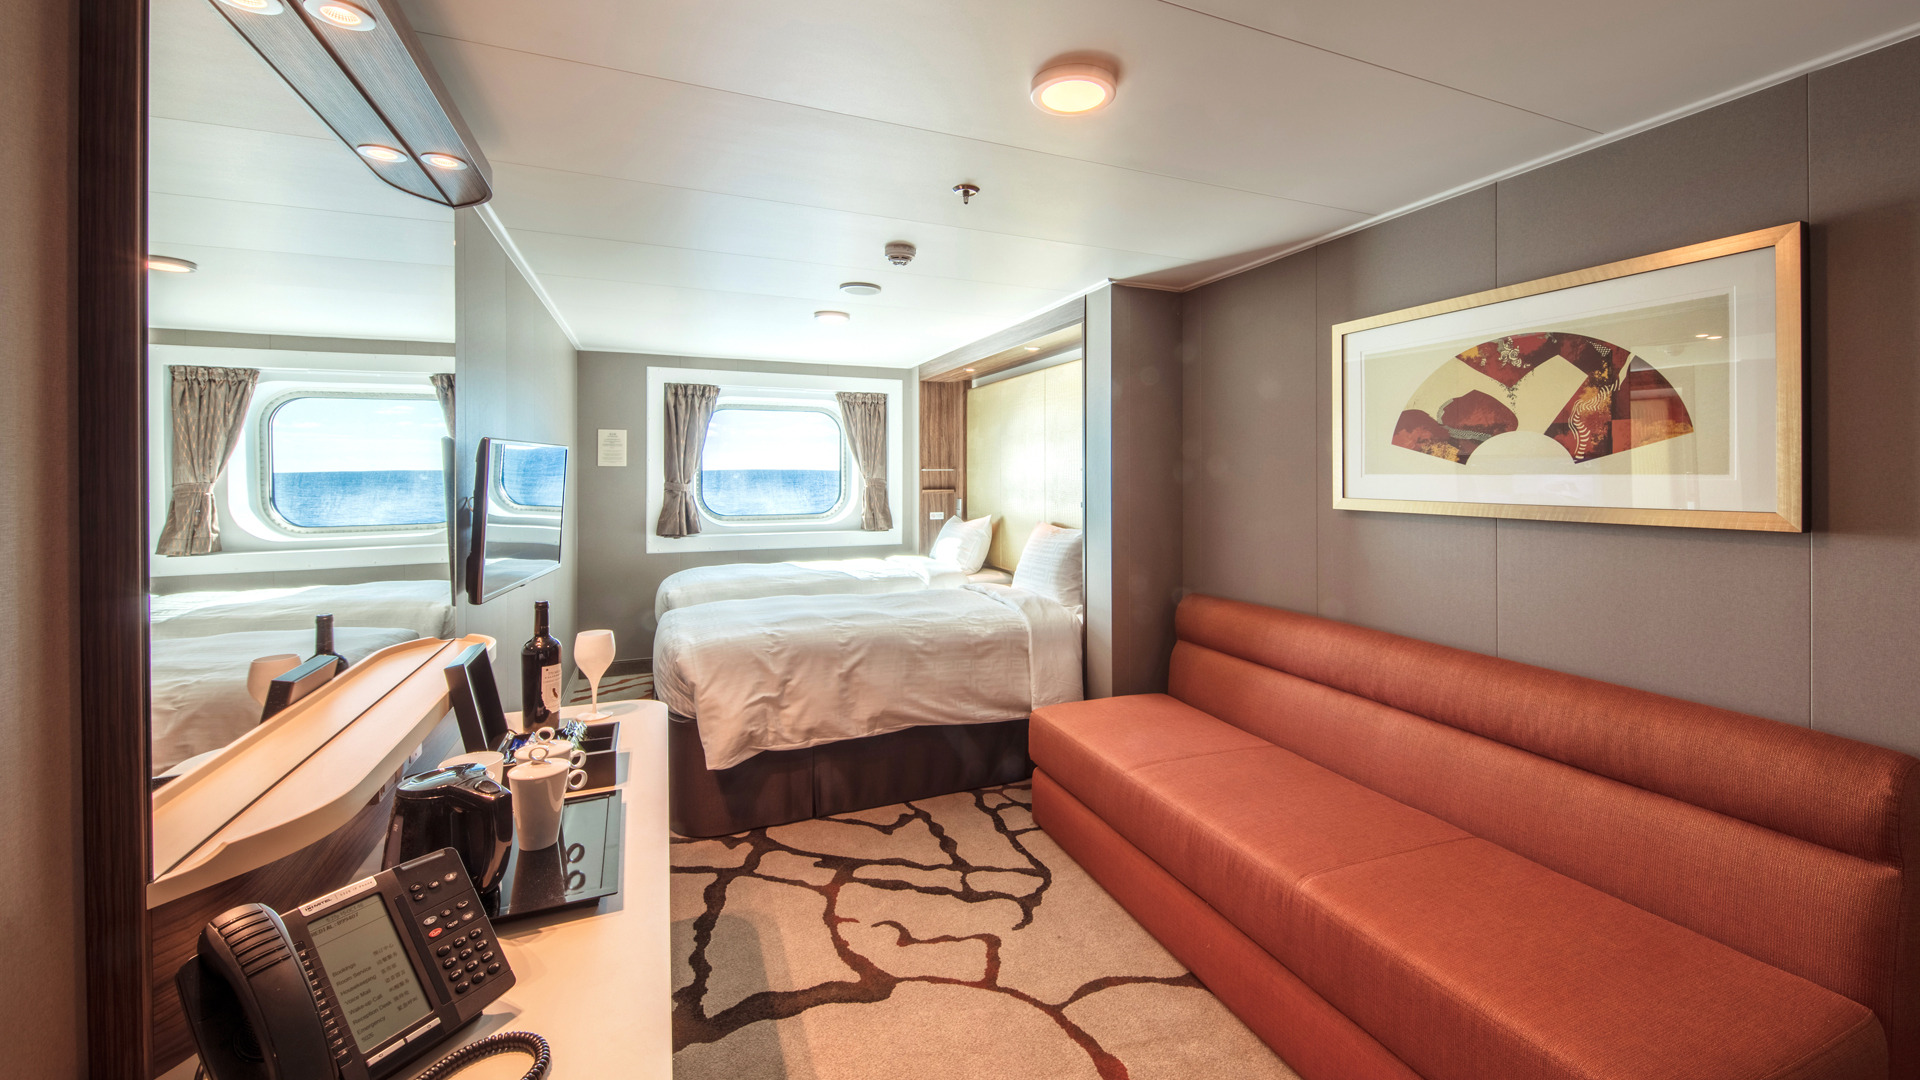 Genting Dream’s cosy Oceanview Stateroom with expansive views of the sea